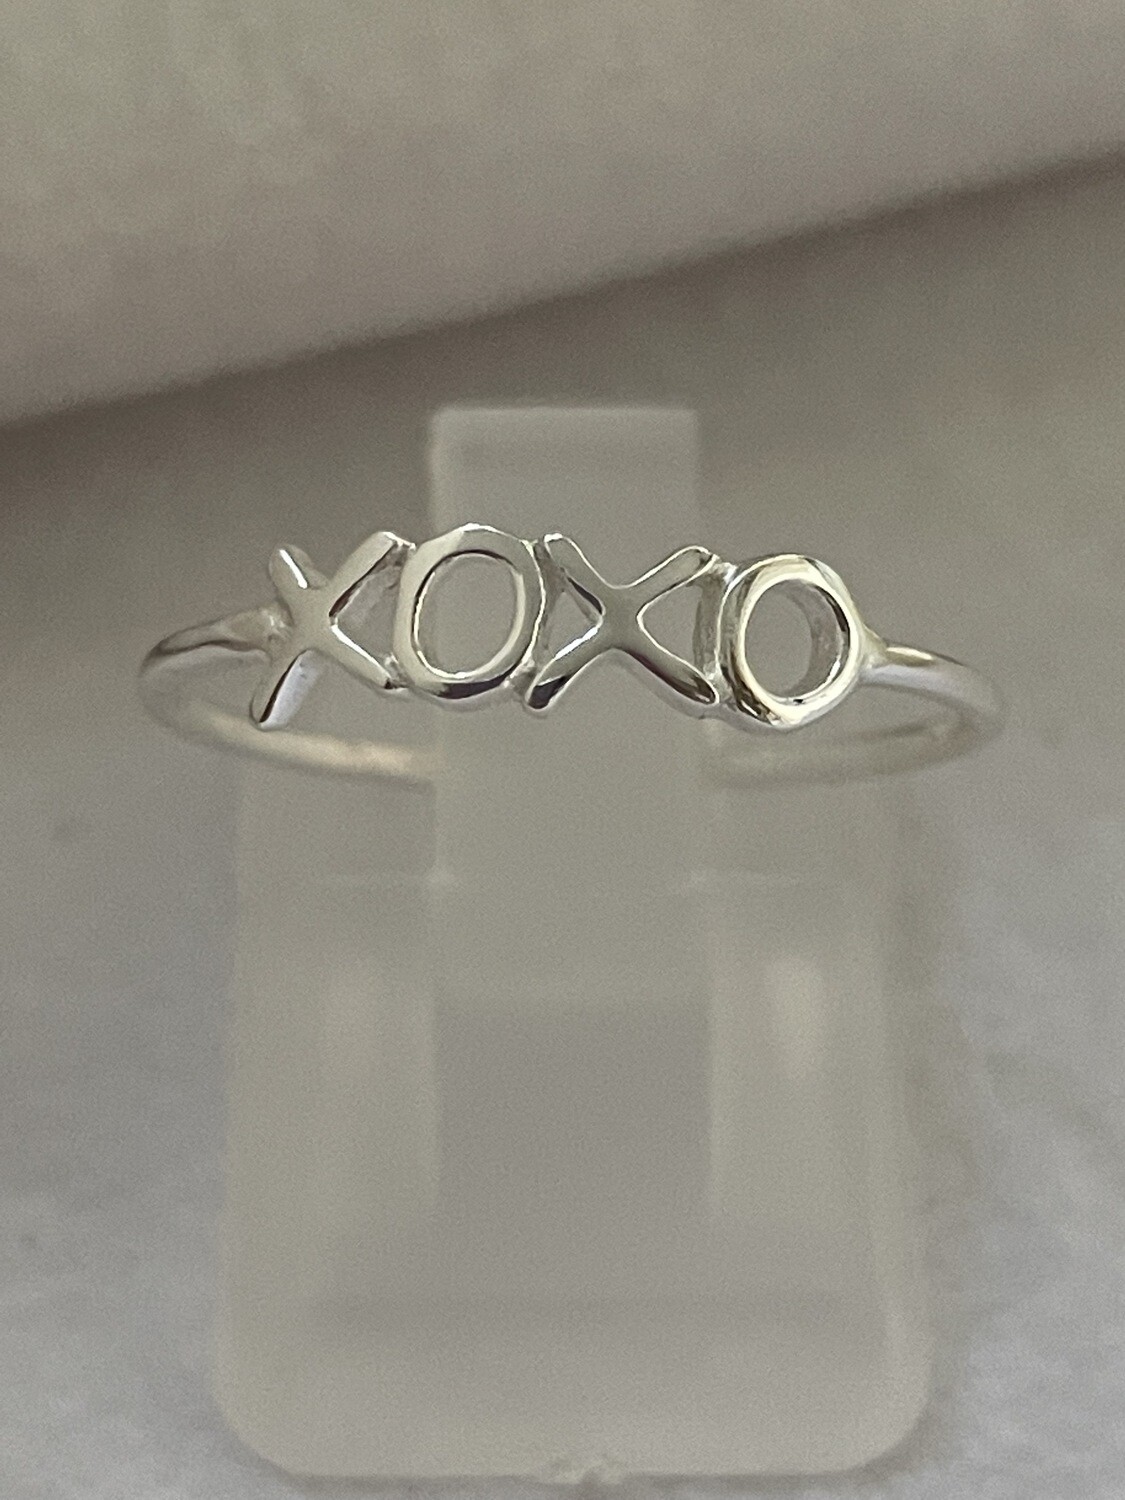 XOXO and lips ring, stacking